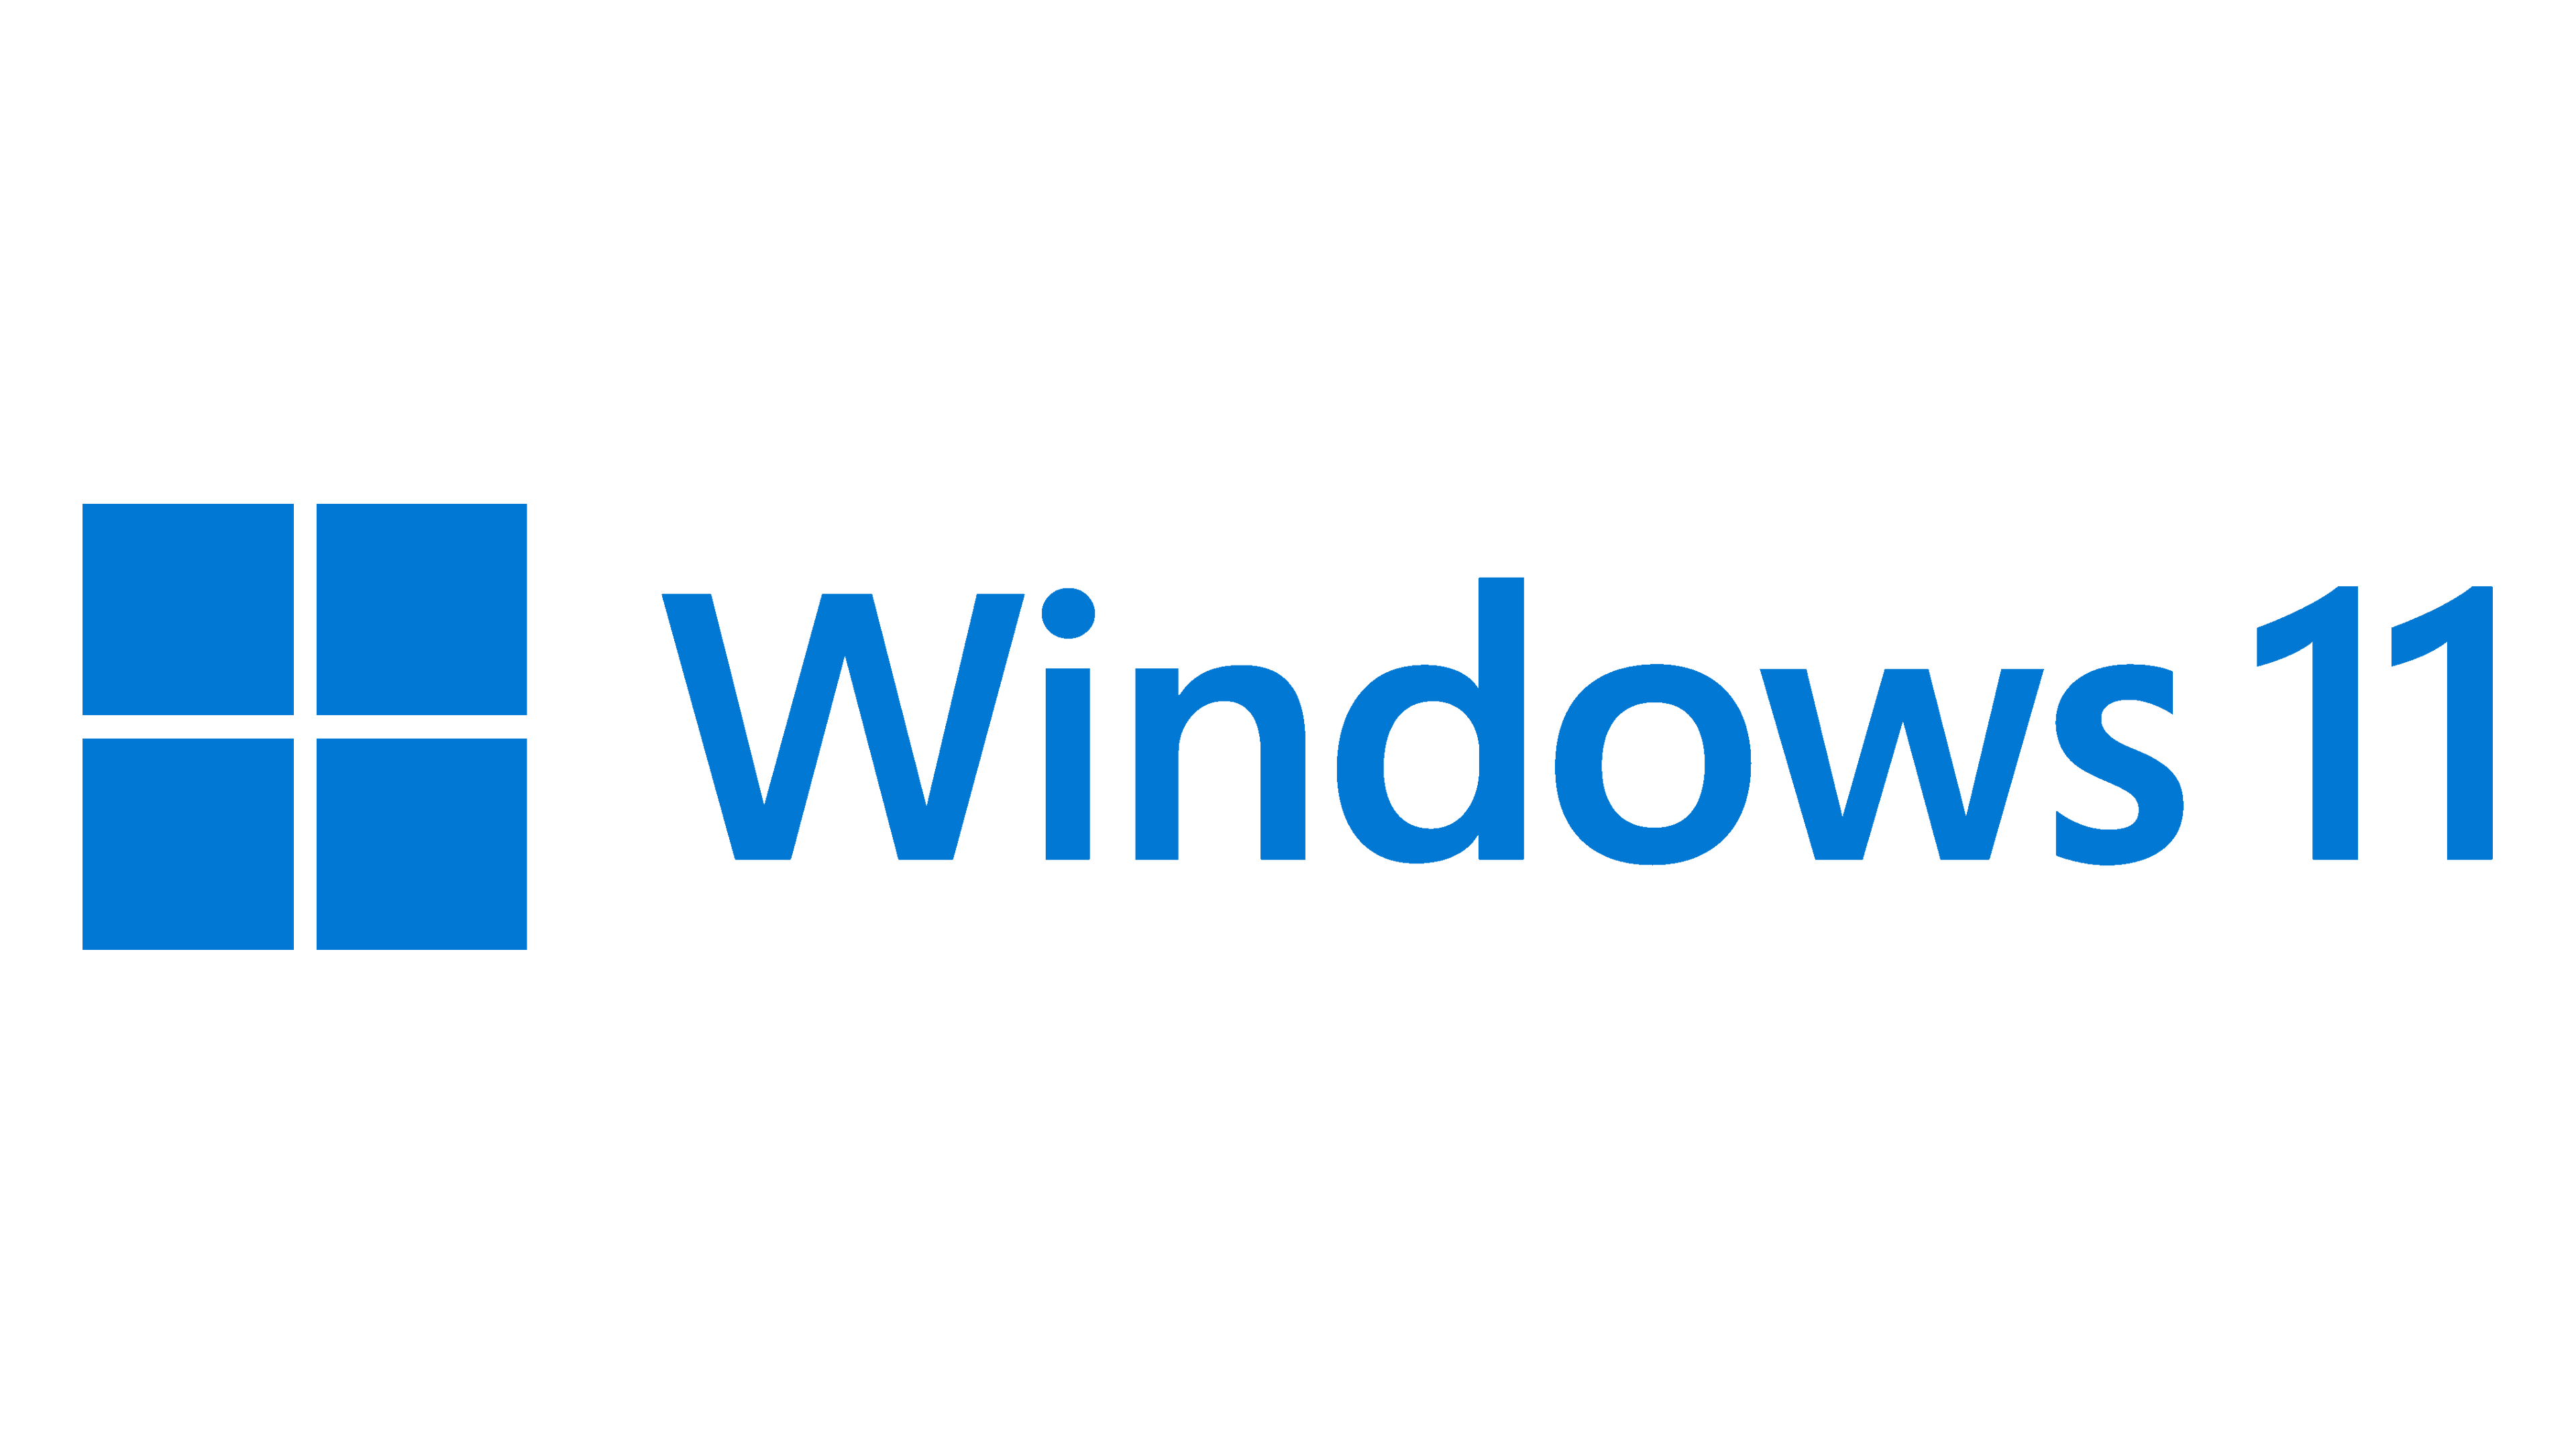 Windows 7 End-of-Life Is Coming – Time To Start Planning - Weston  Technology Solutions